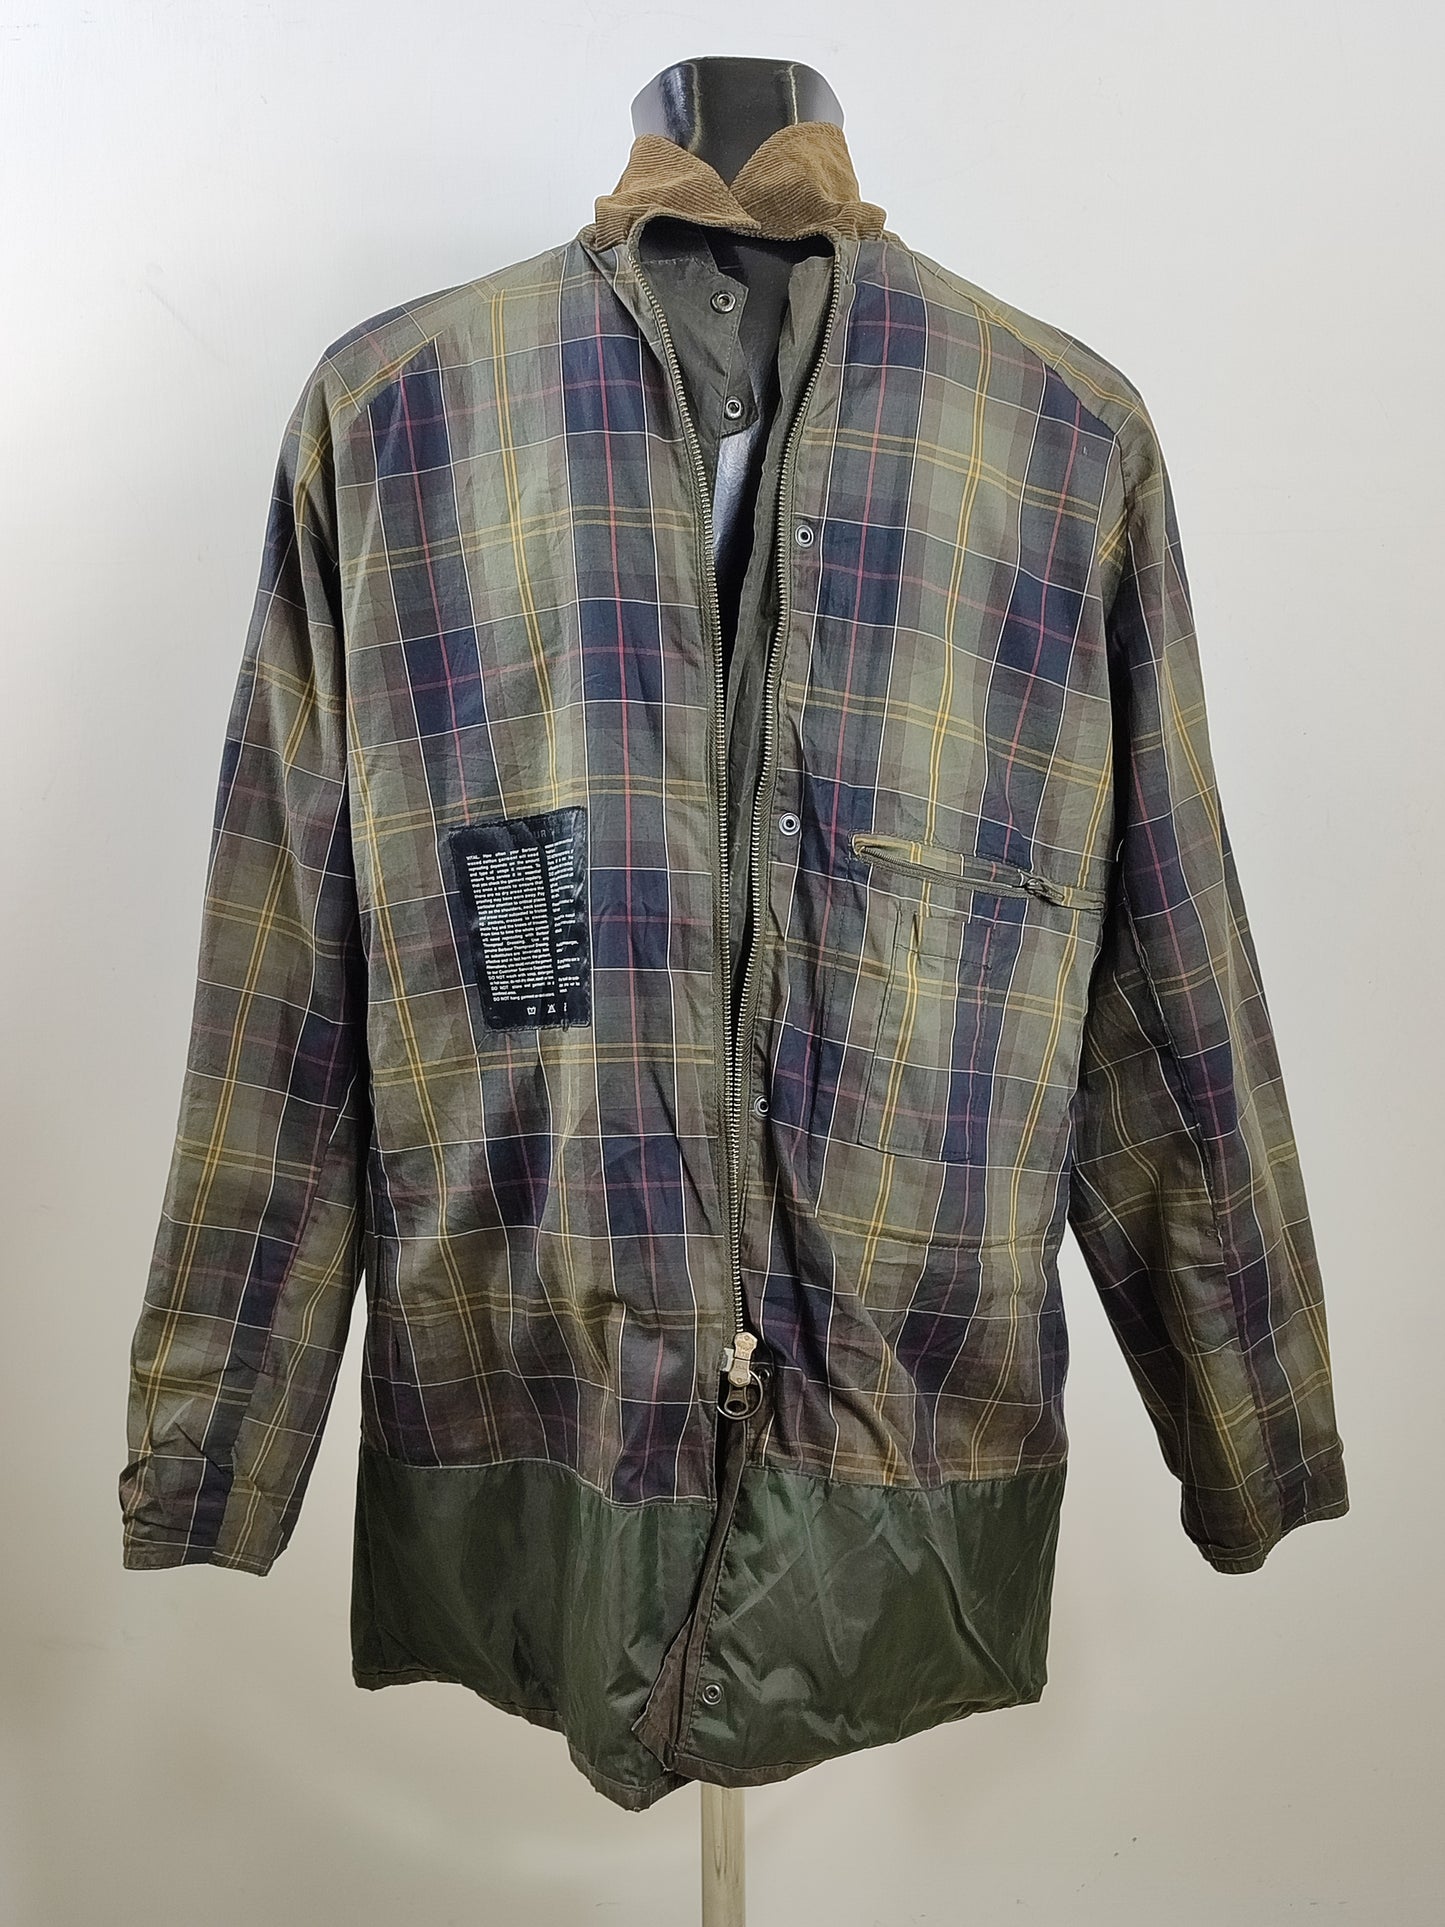 Giacca Uomo Barbour Cerata Verde Uomo Large Man Lightweight Green Beaumont Jacket Size L